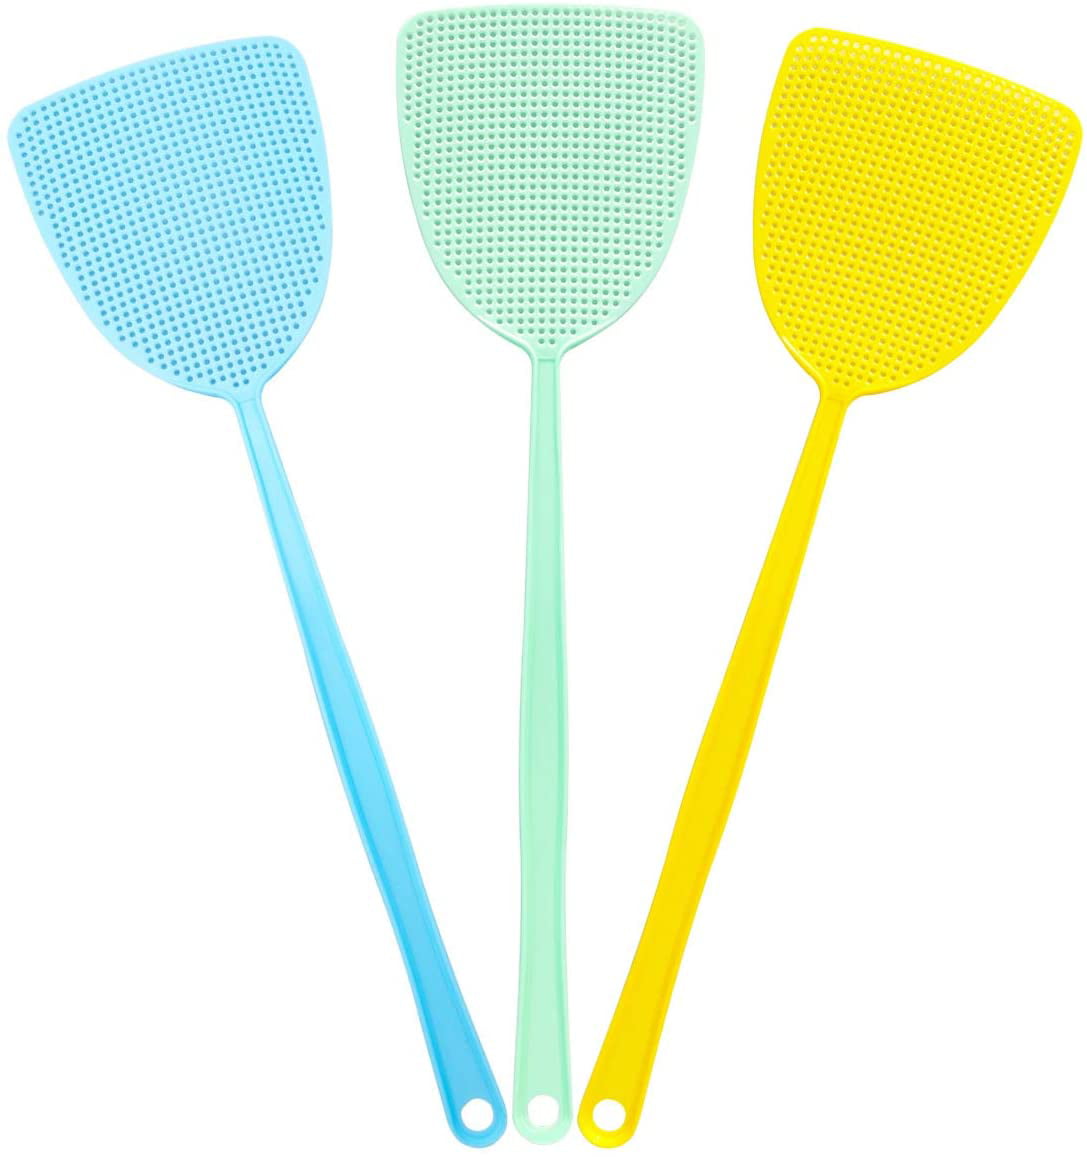 Summer Fly Swatter Long Handle Flies Mosquitoes Control Tool B3H1 Insects P3Z6 